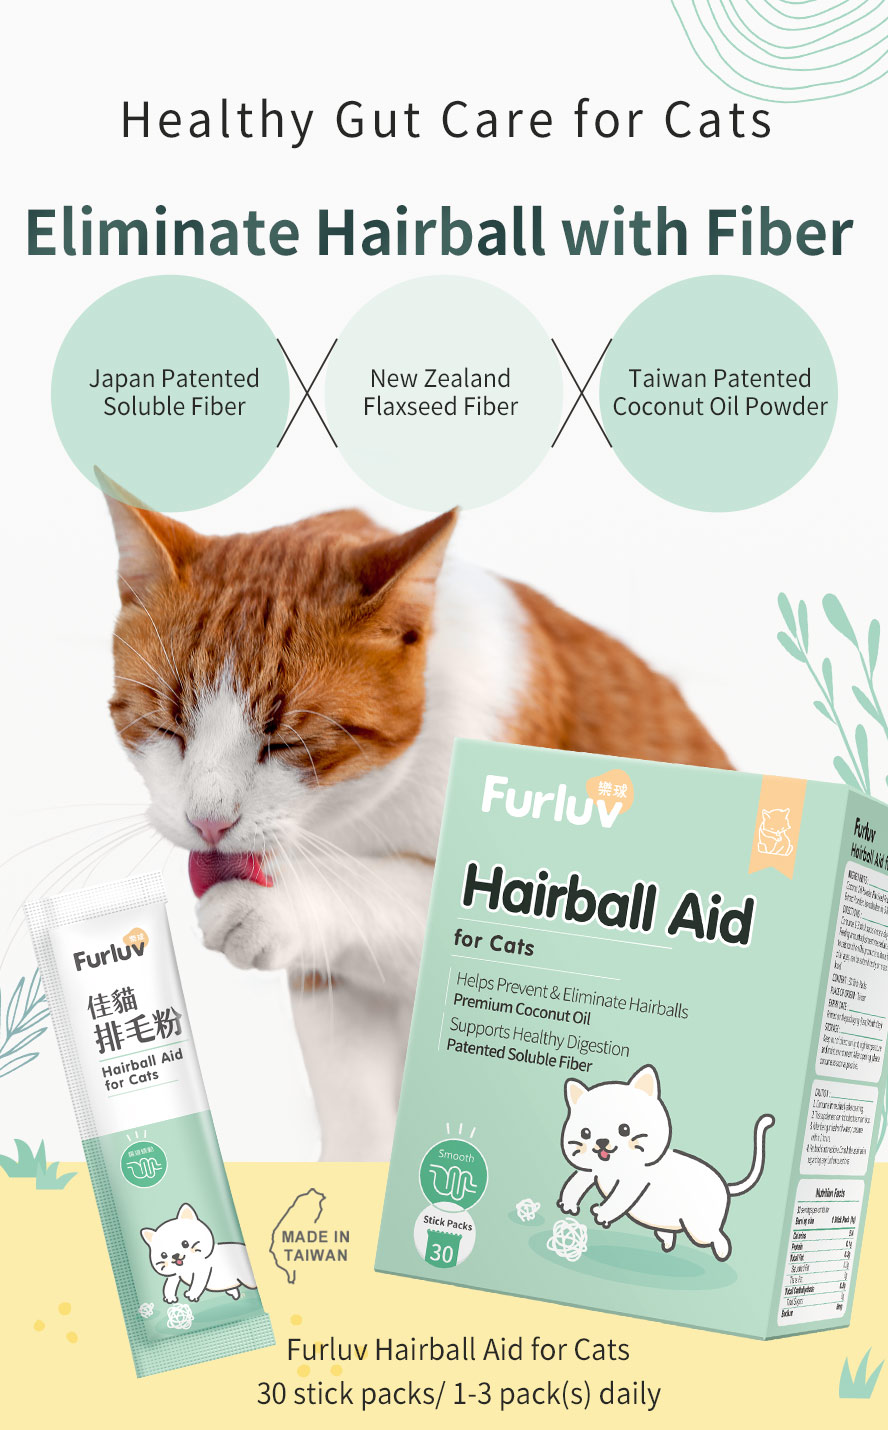 Furluv Hairball Aid for Cats eliminates hairball withh soluble fiber, flaxseed fibvre and coconut oil powder for healthy gut support